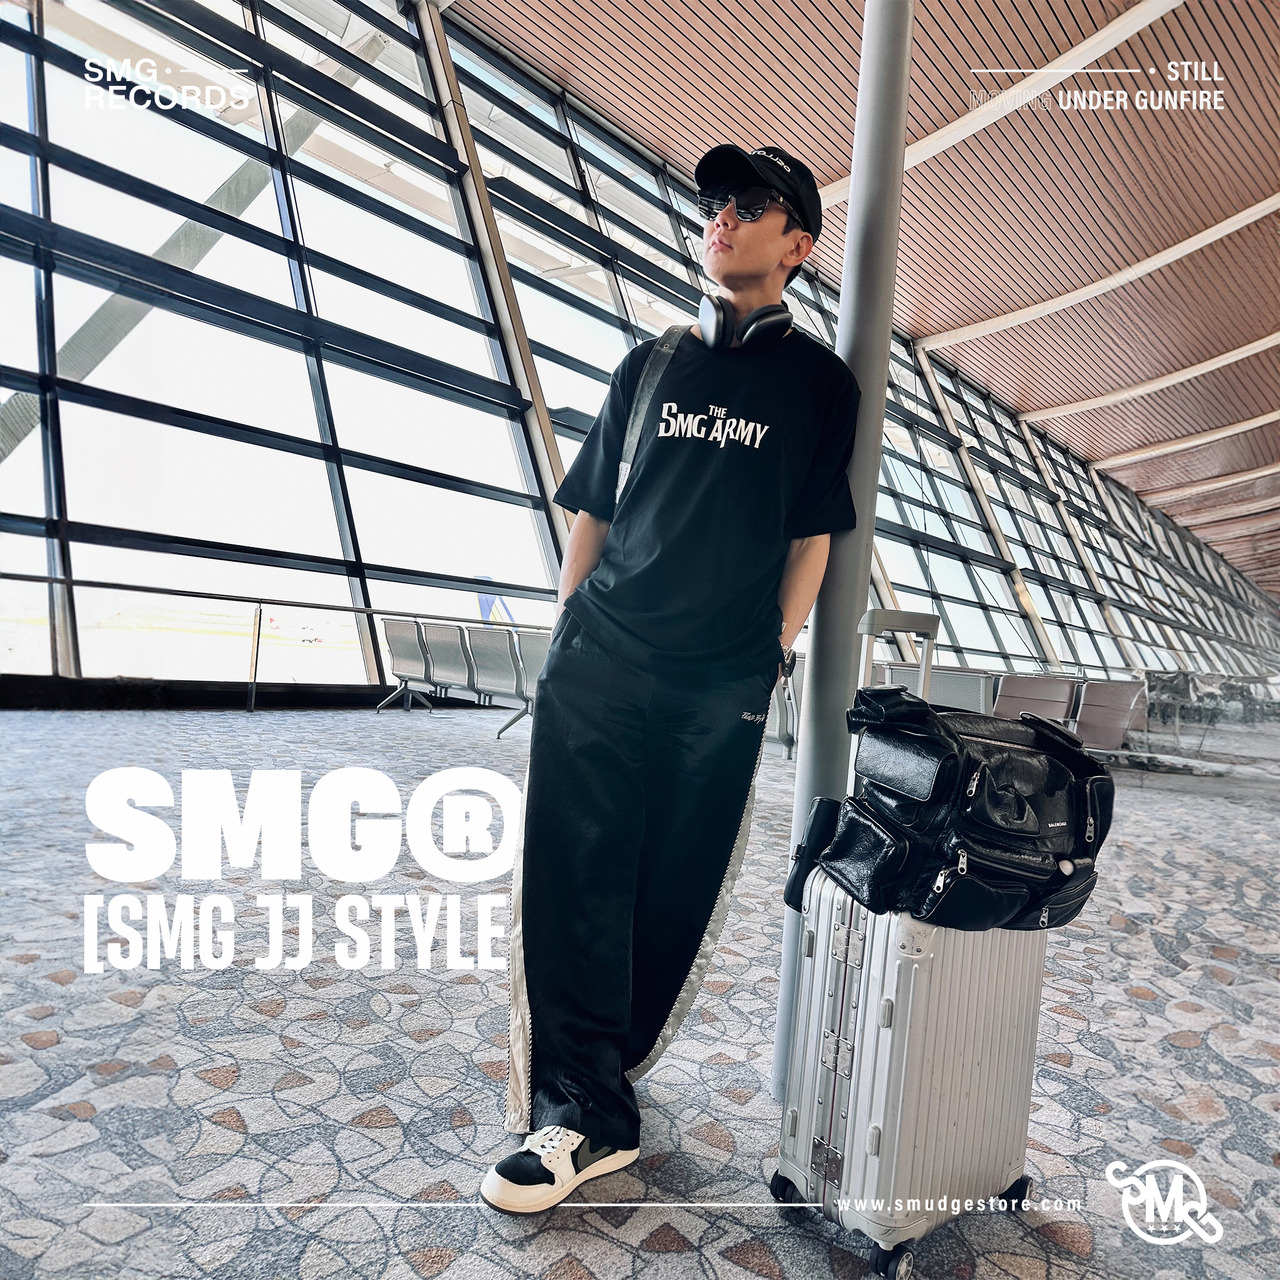 SMG 穿搭特輯/2023 SS - SMG JJ STYLE Abby Road Tee